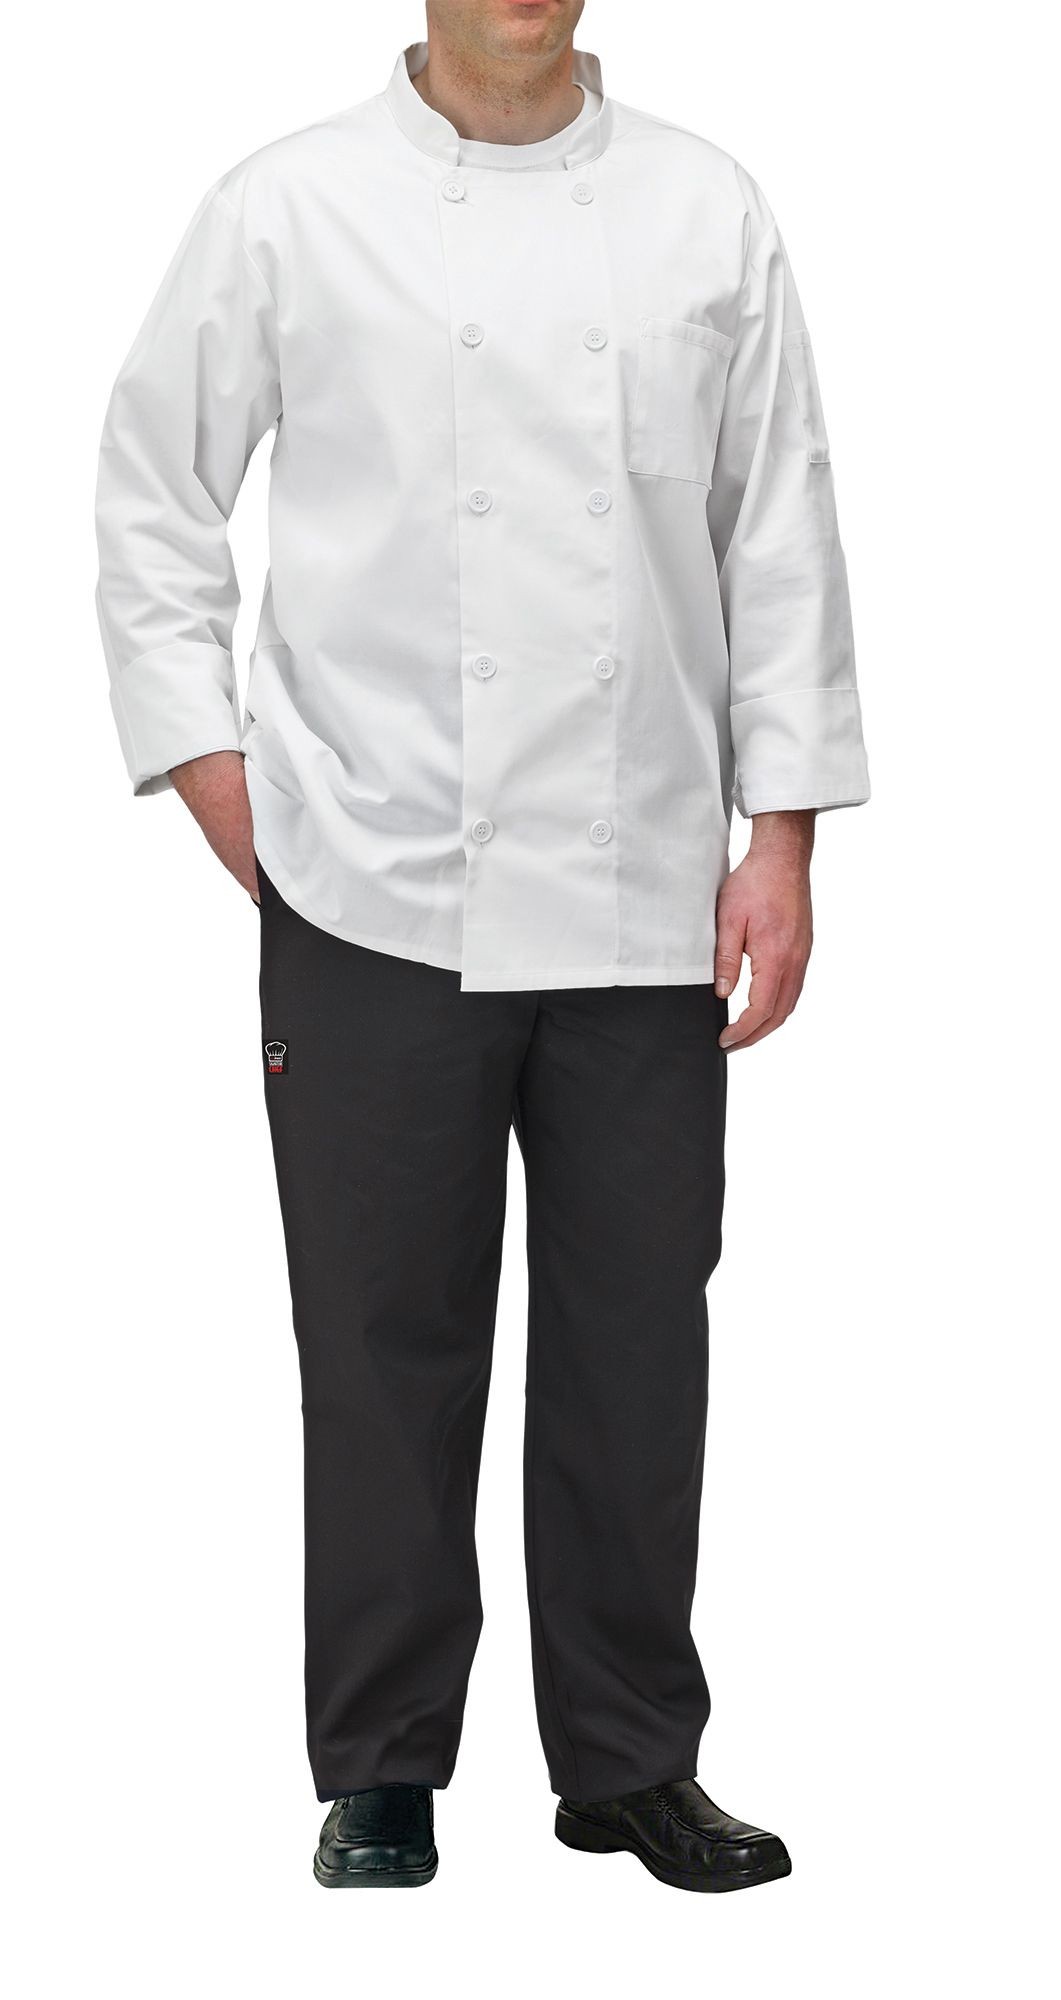 Winco UNF-5WS White Poly-Cotton Blend Double Breasted Chef Jacket with Pocket, Small